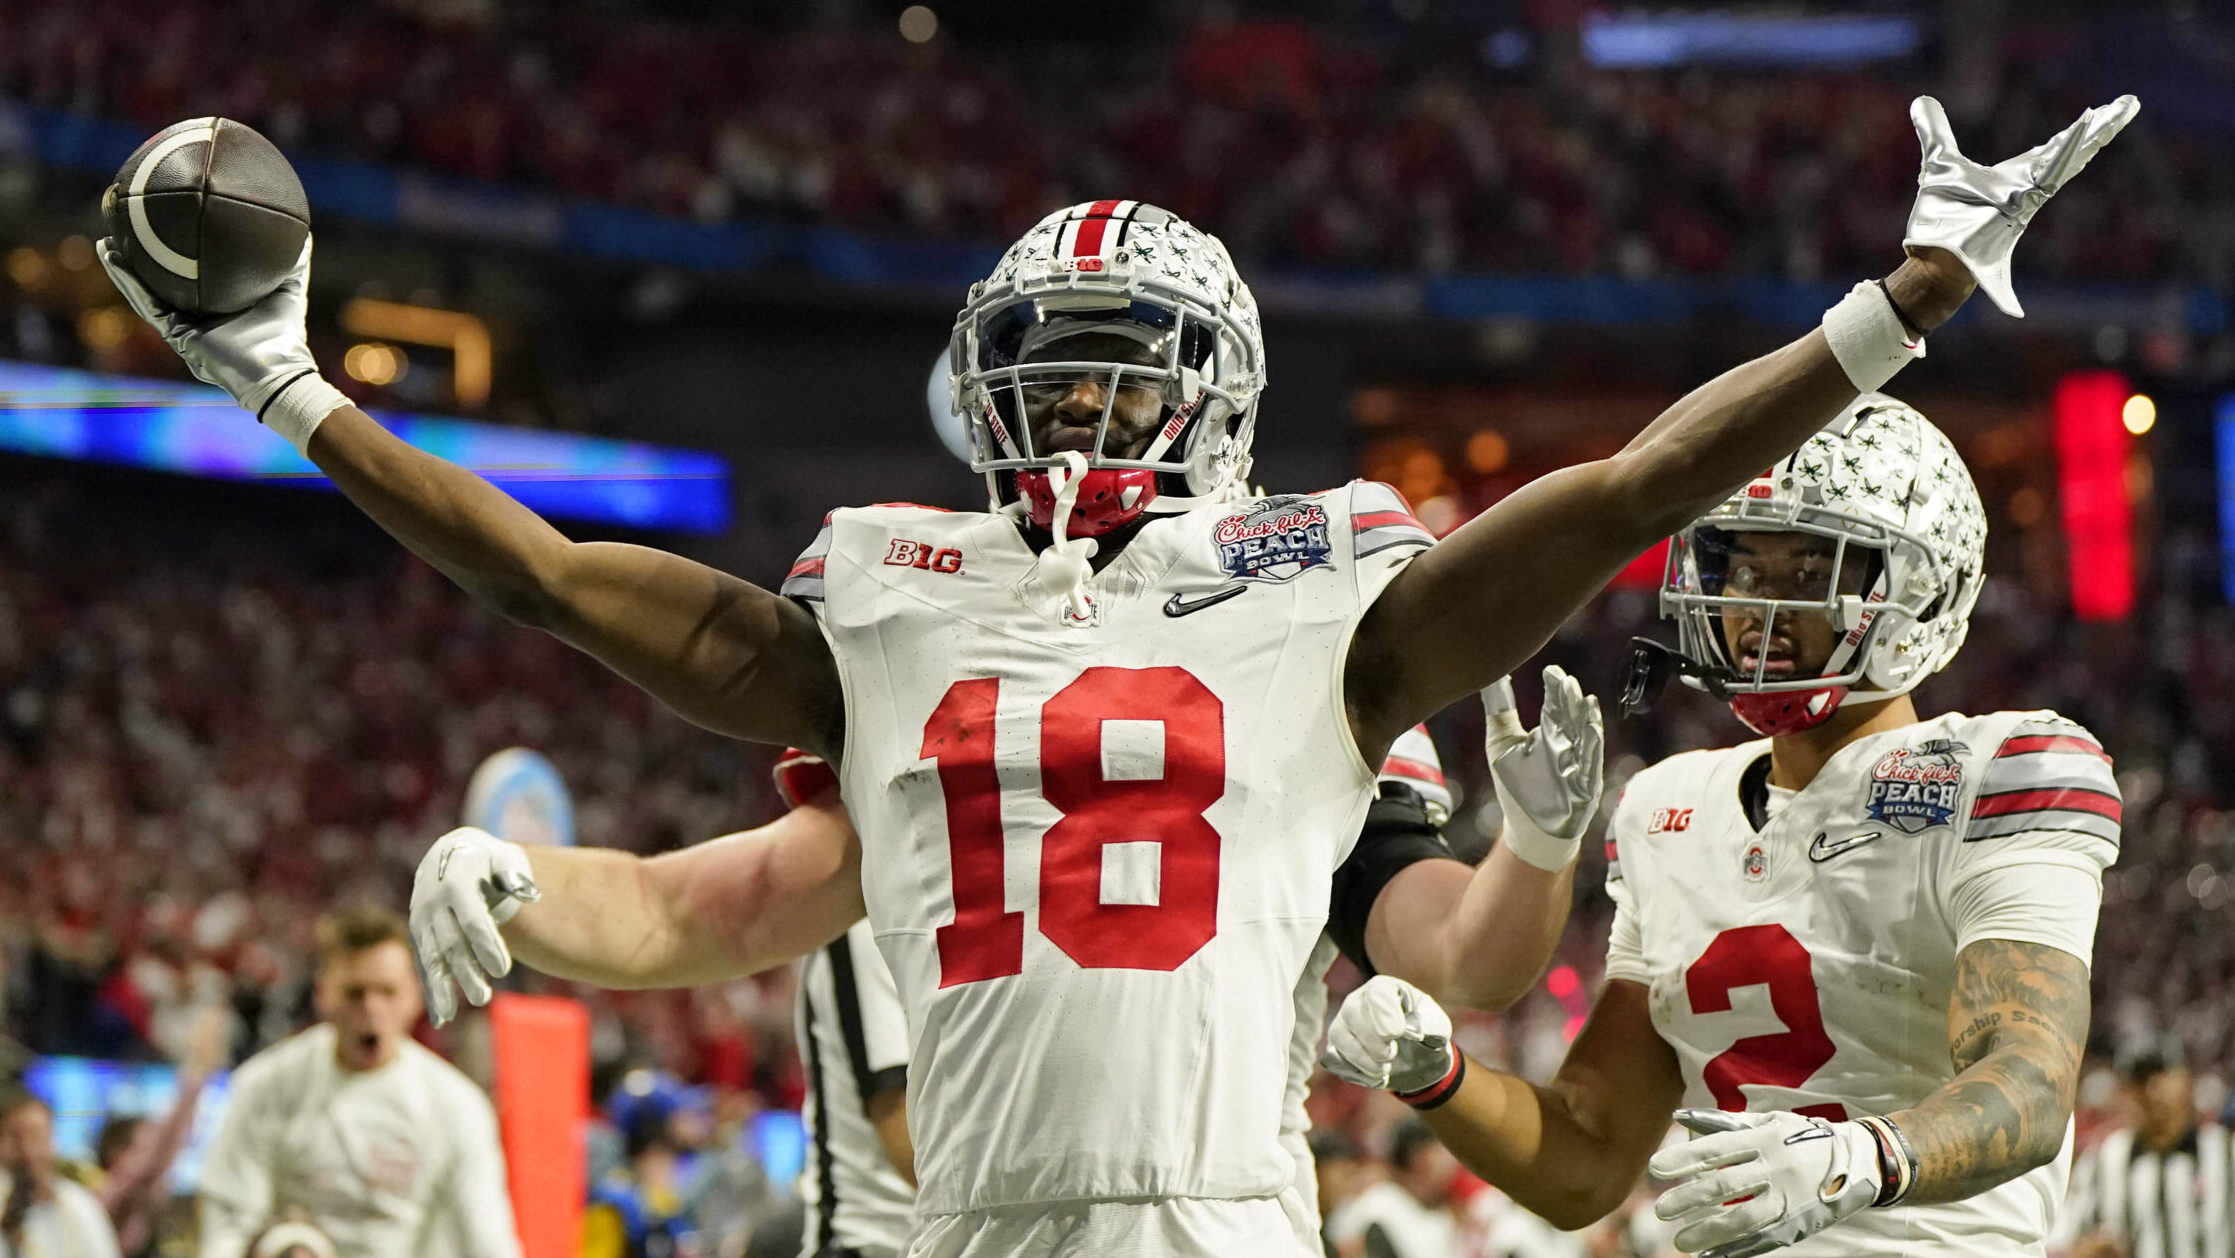 Ohio State WR Marvin Harrison Jr. celebrates after a touchdown with his arms out